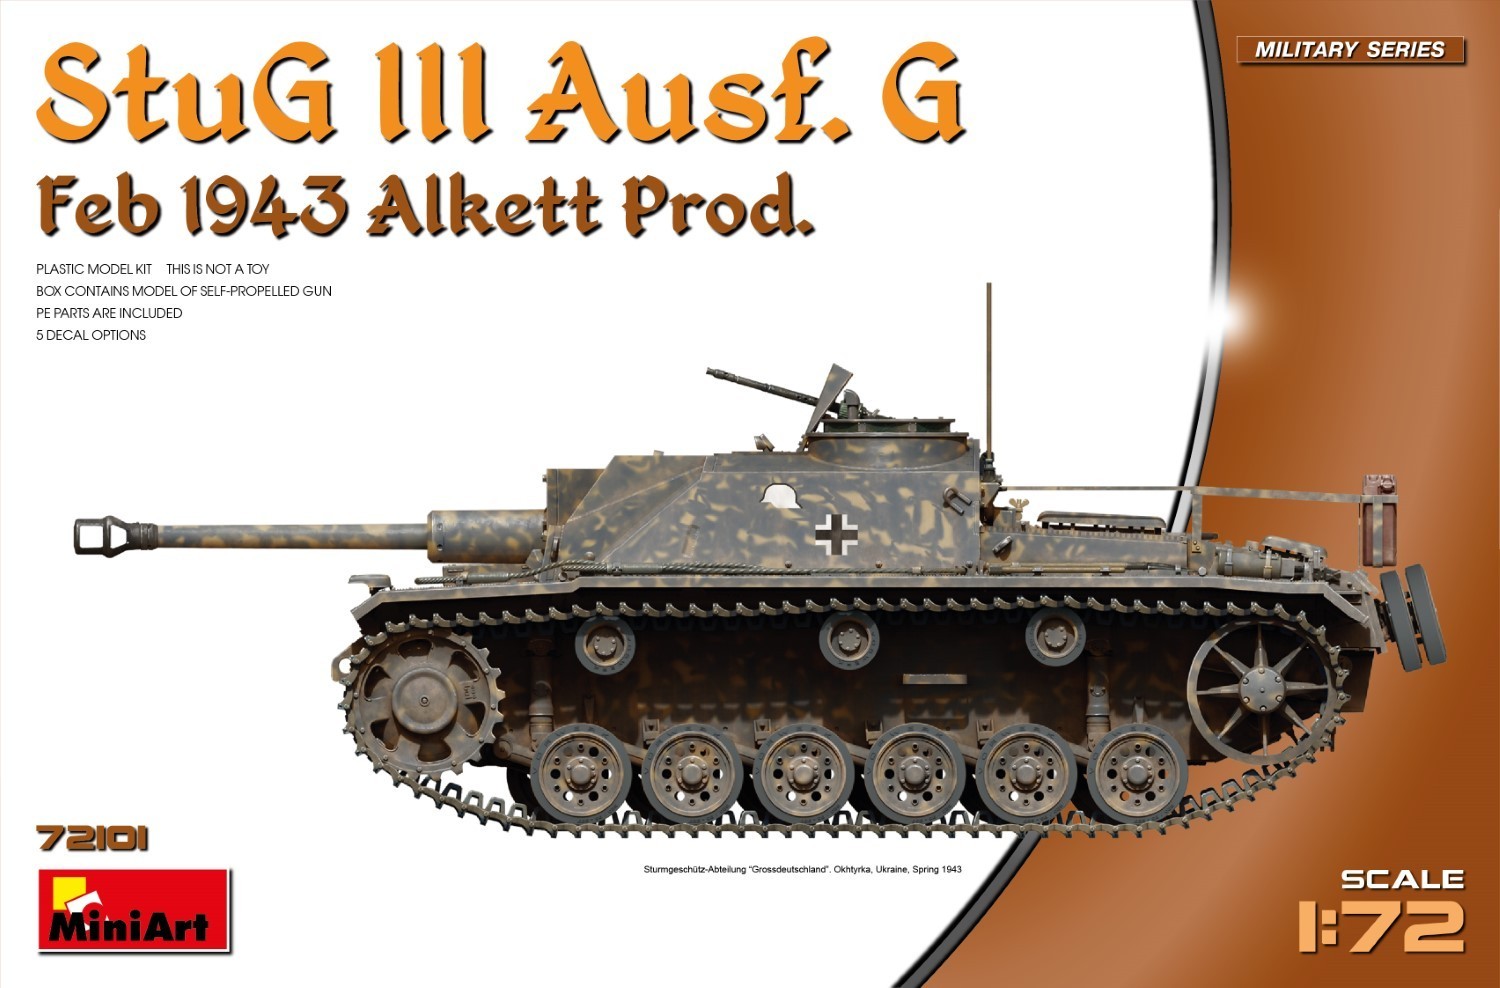 New Military Series Announced in 1/72 Scale, Starting with StuG III Ausf. G Box Art